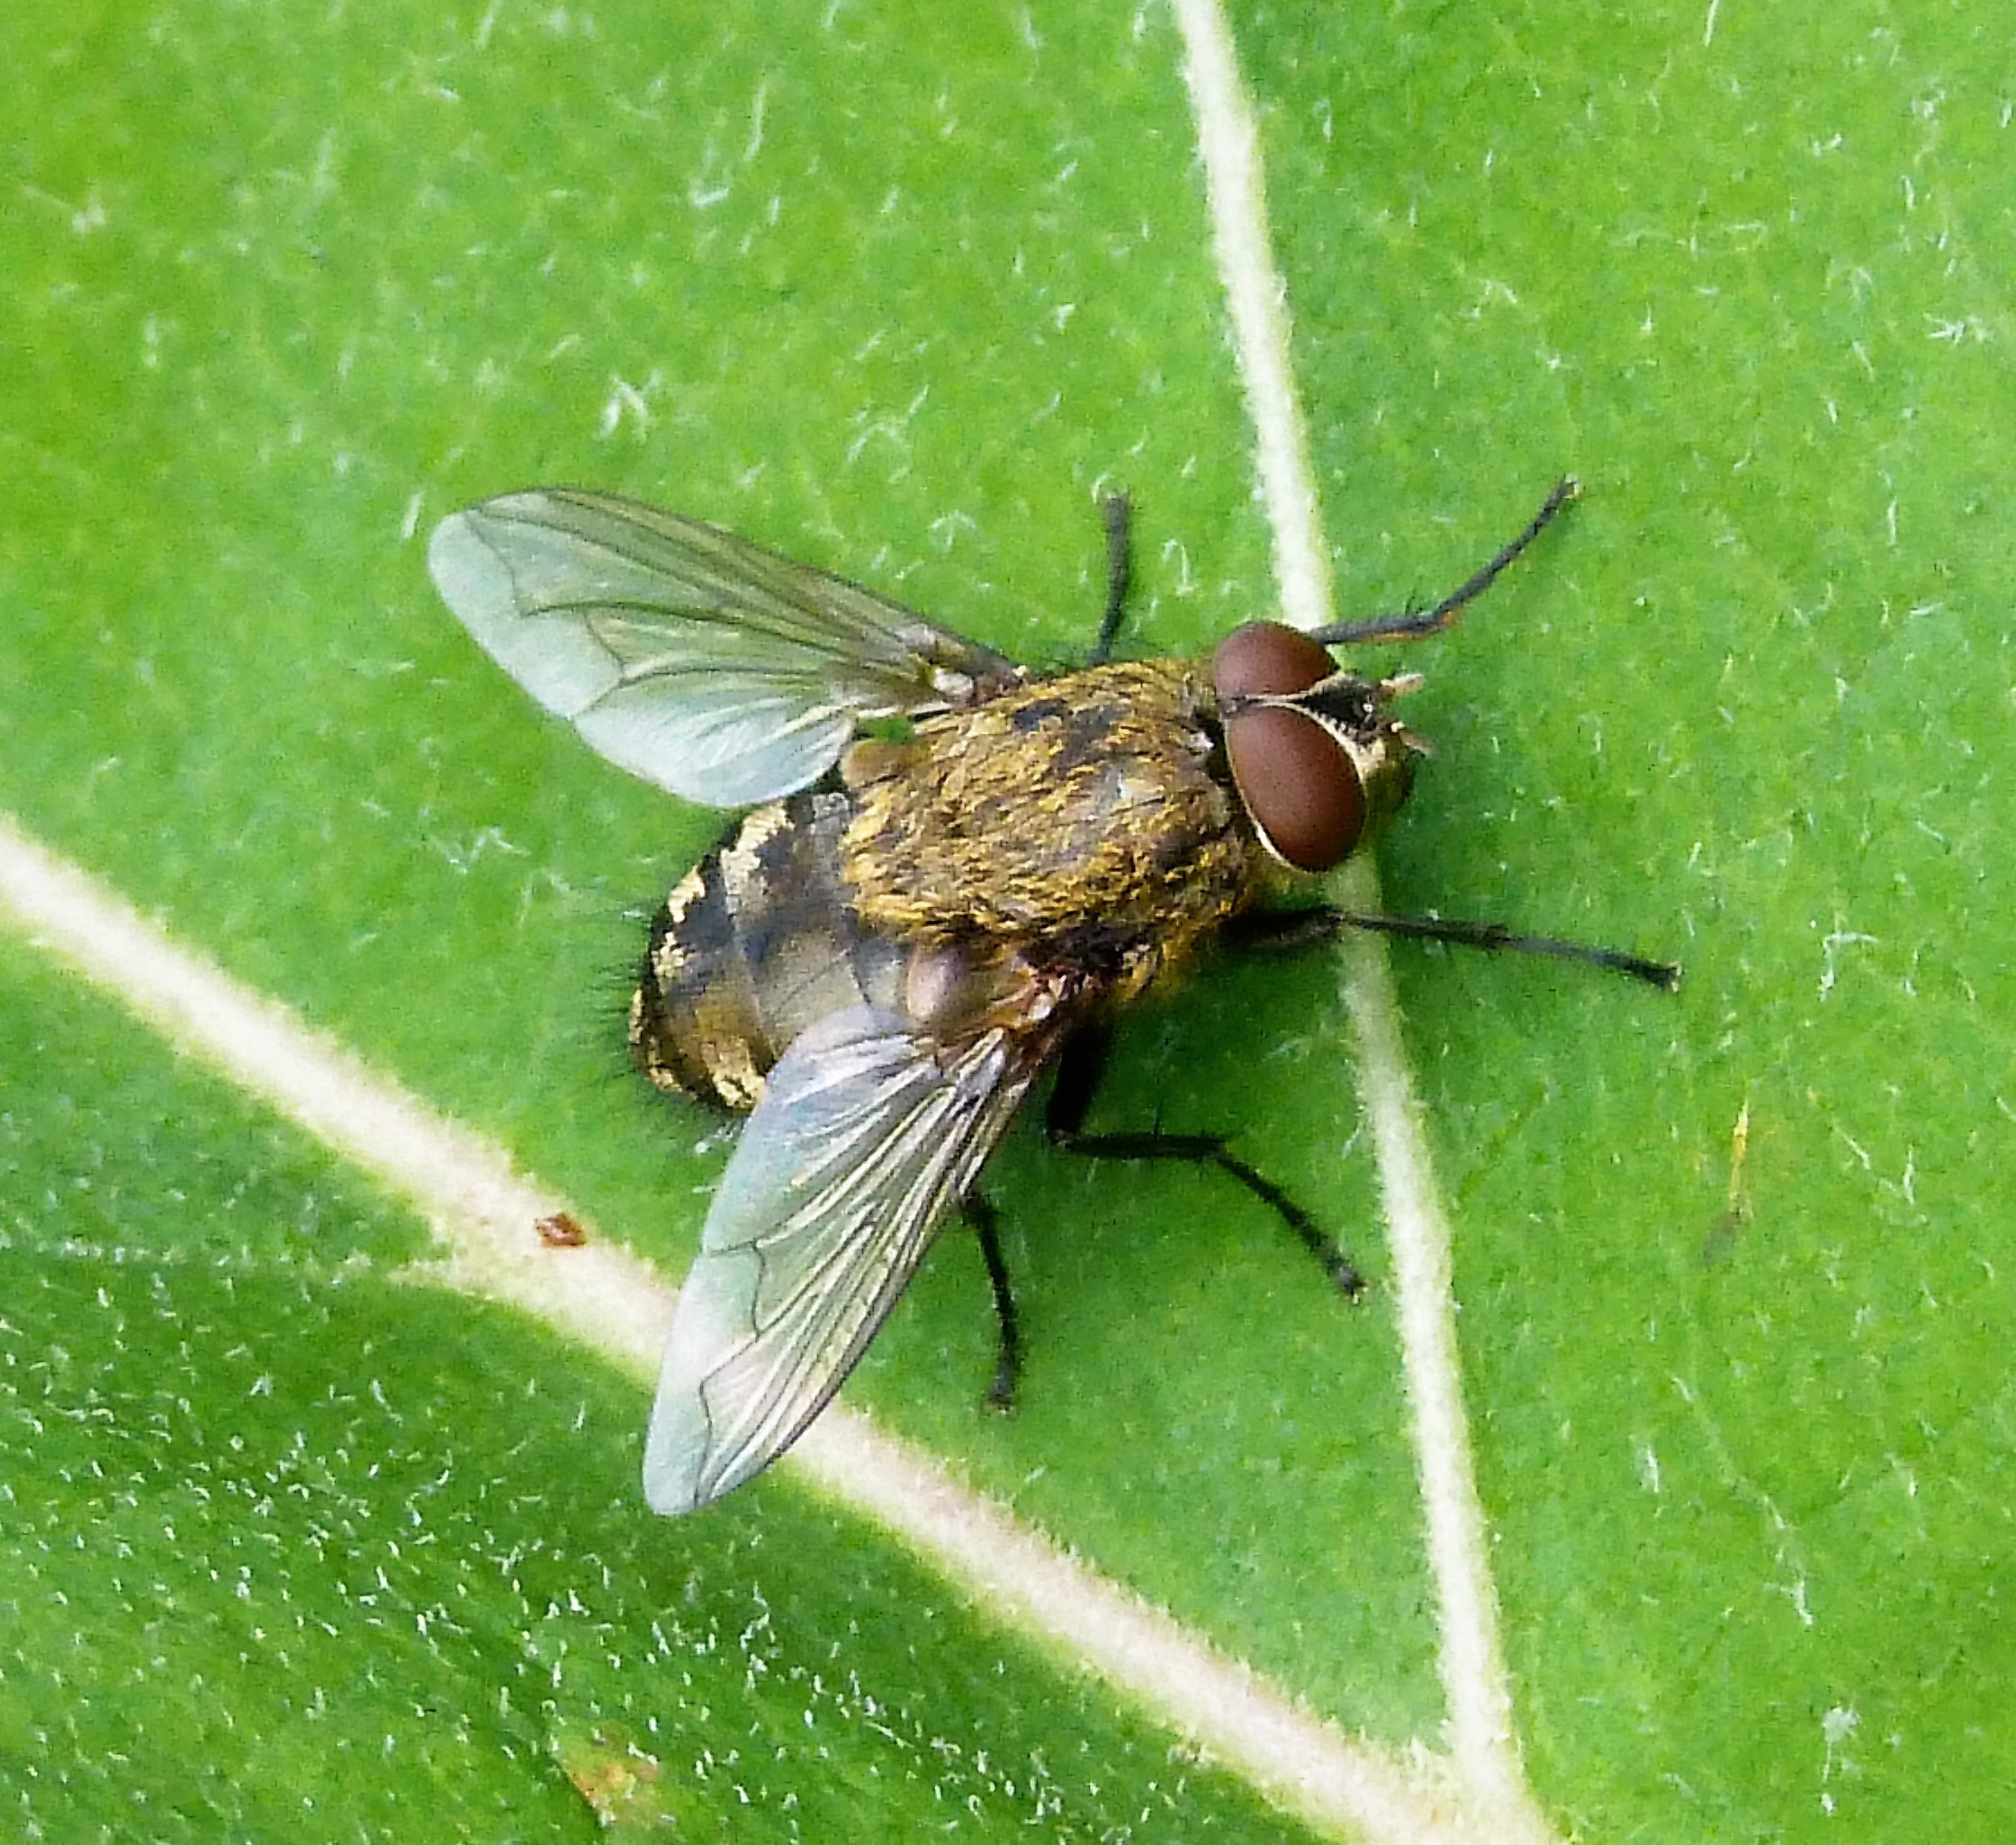 this is a picture of cluster fly in Oakland, CA